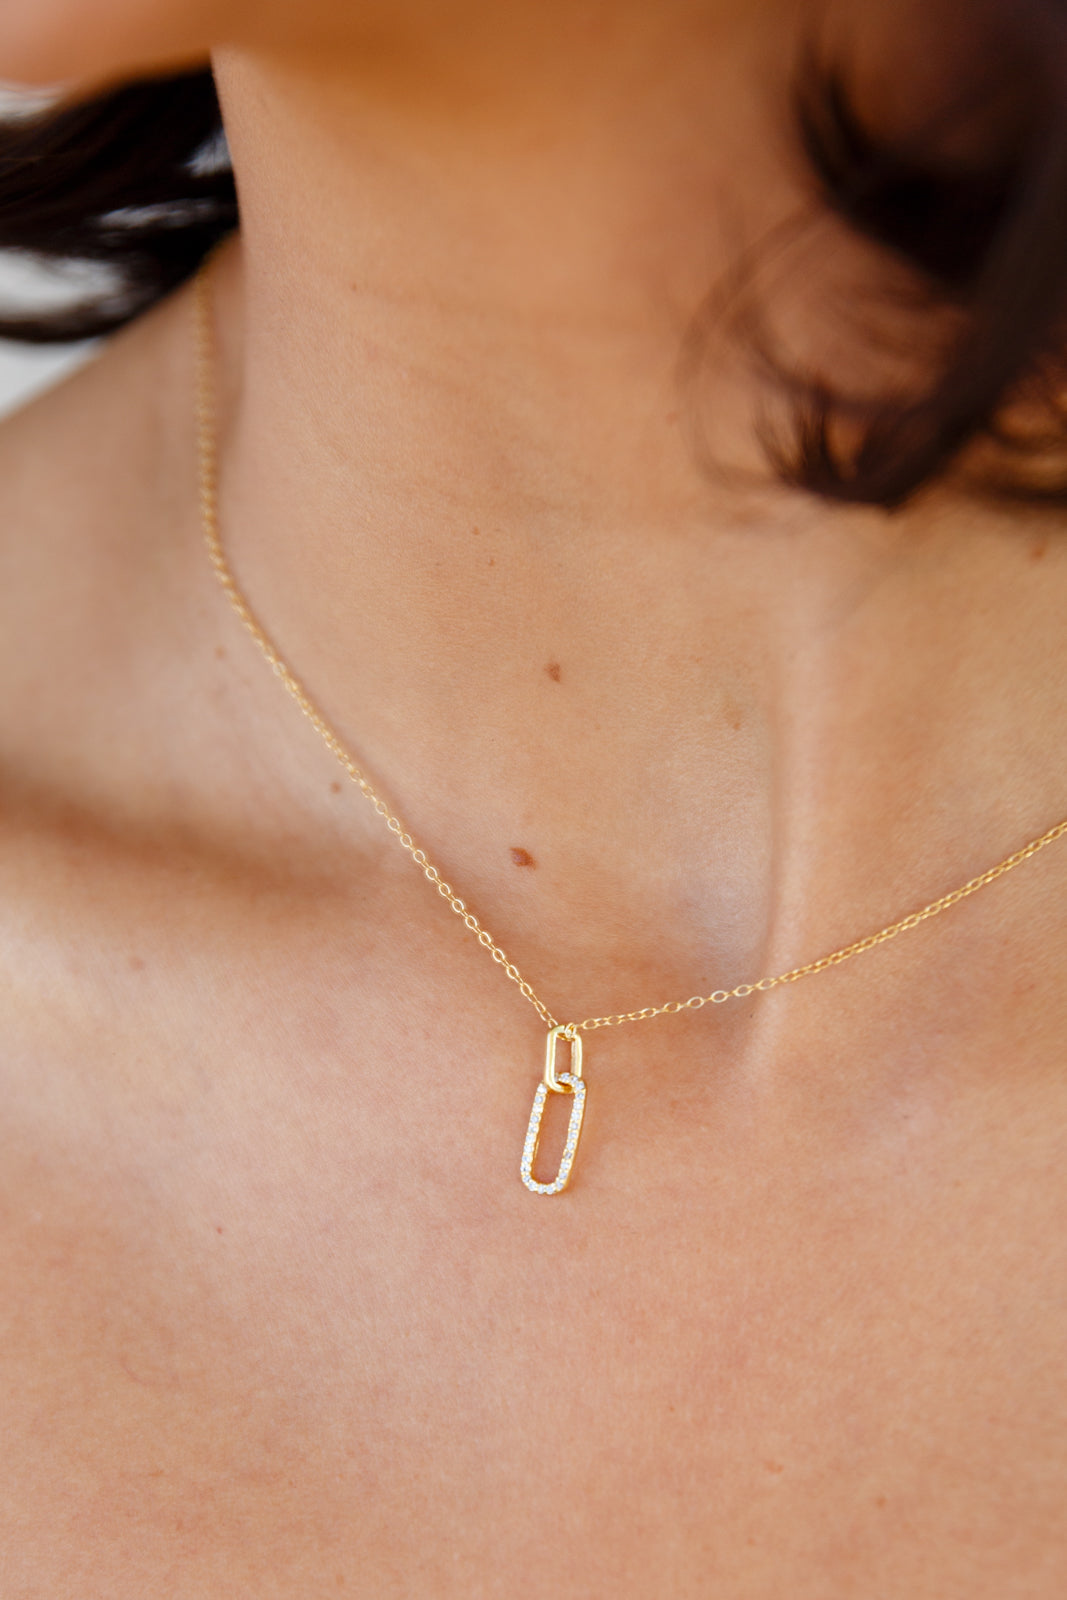 Hooked on You Necklace - Dixie Hike & Style